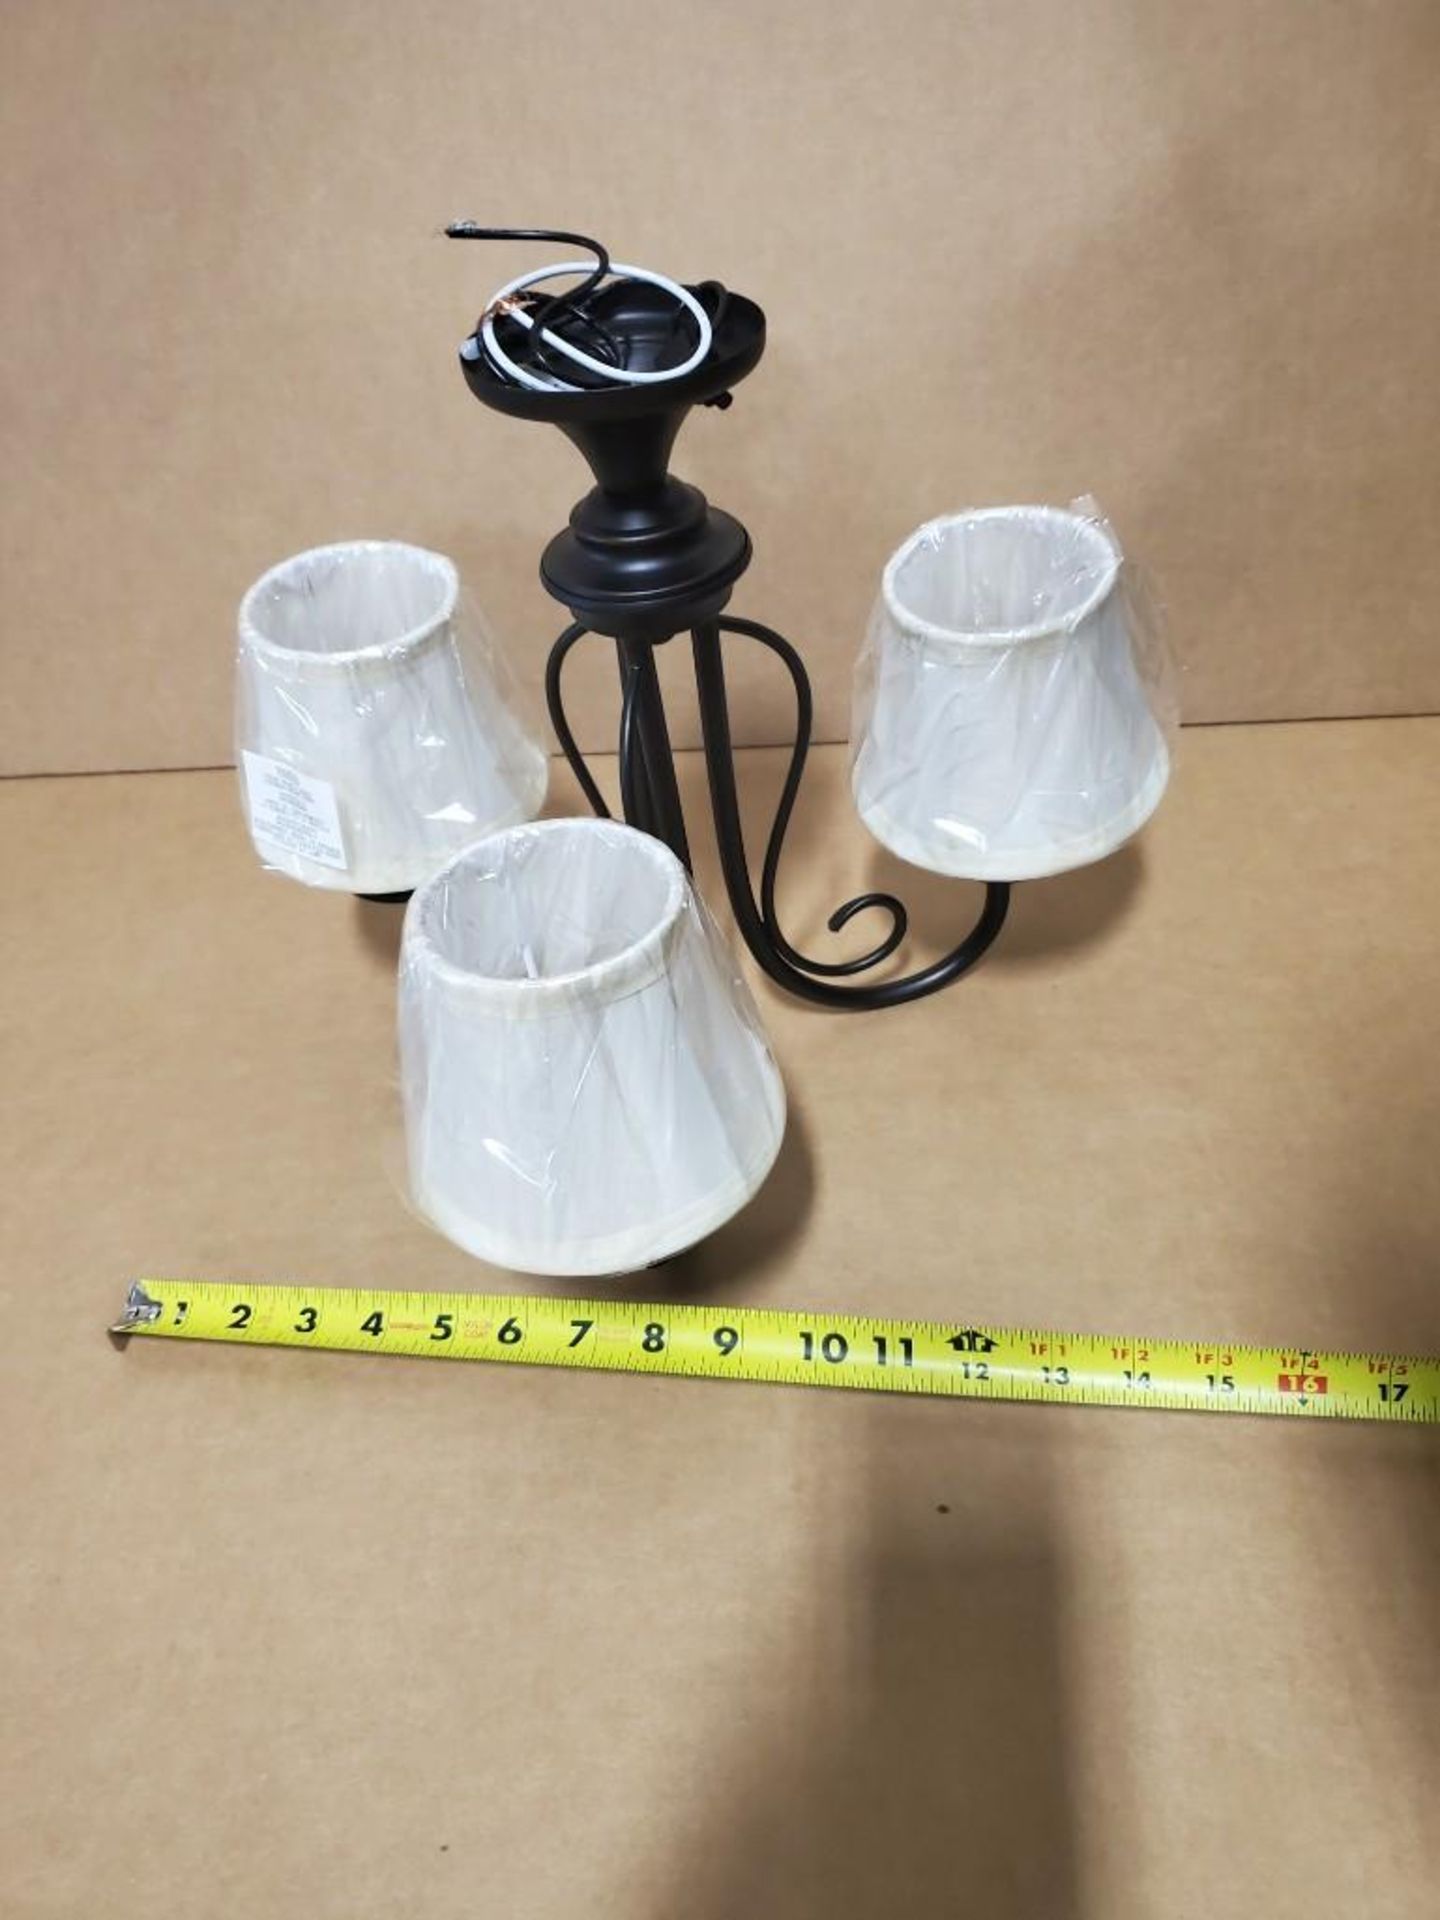 Qty 128 - SunLink 12 volt 3-light chandelier w/ shade. Part # RV-181303-744. New in bulk box. - Image 2 of 8